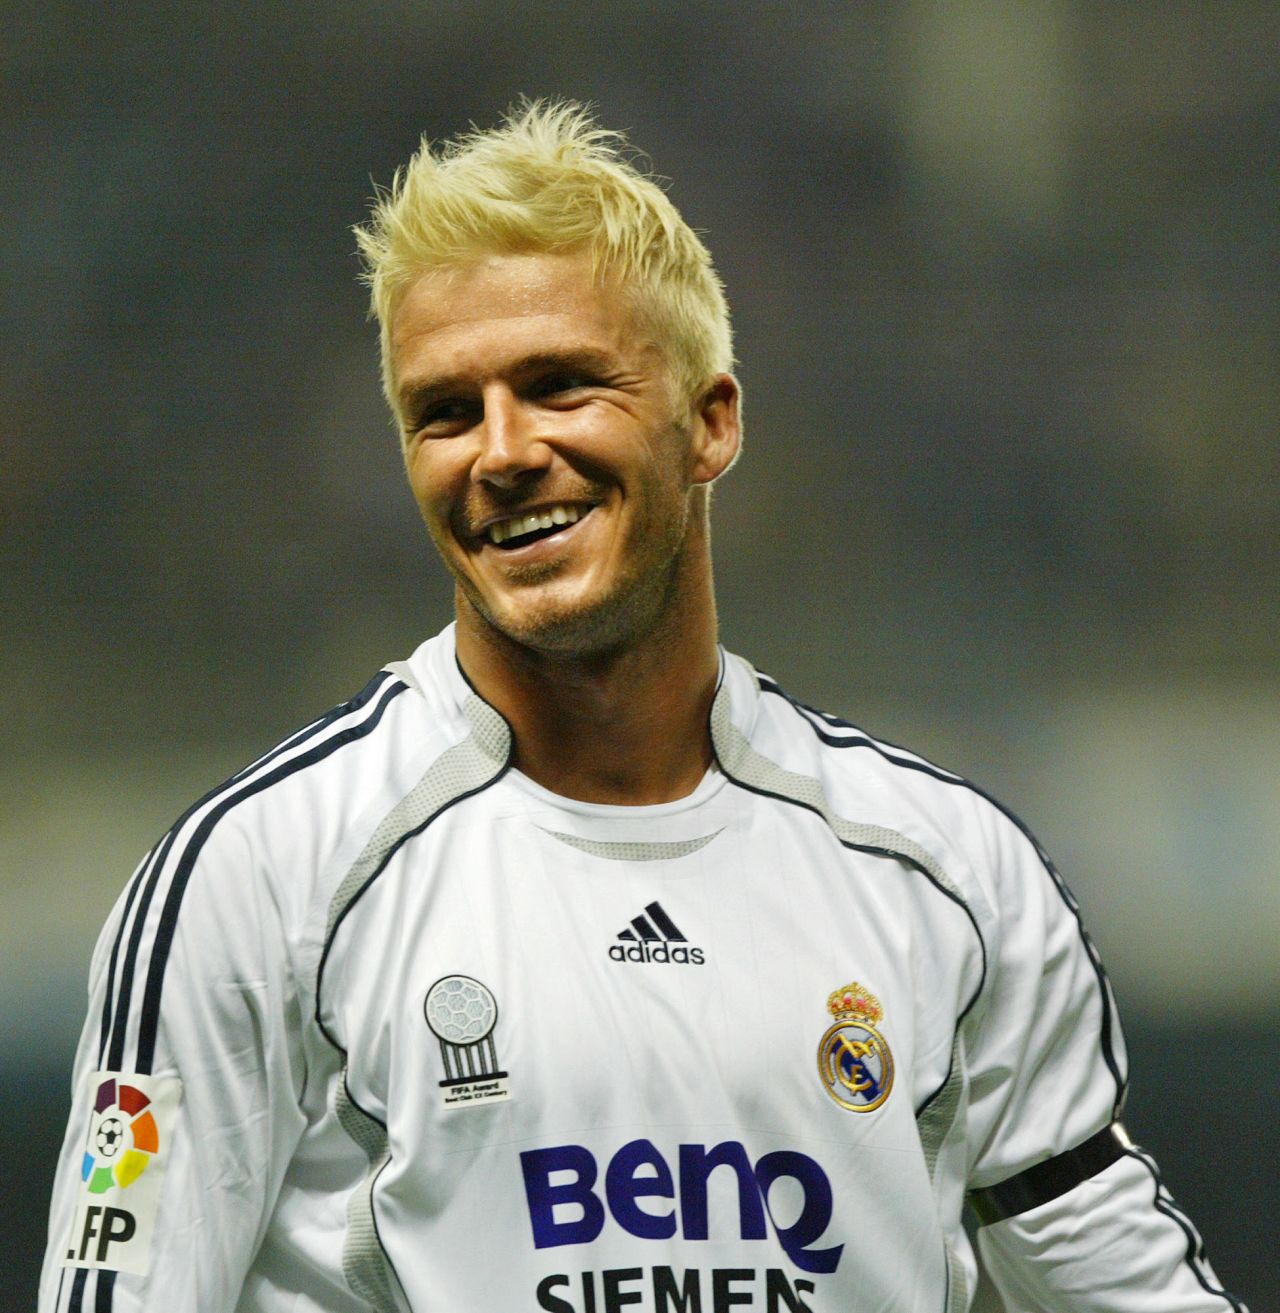 <strong>2003-2006 Real Madrid "Galacticos": </strong>Although David Beckham was a big marketing success for Real Madrid, his teams won no trophies until their La Liga title in his fourth season. By then Becks had signed with the LA Galaxy and didn't feature frequently on the team. 